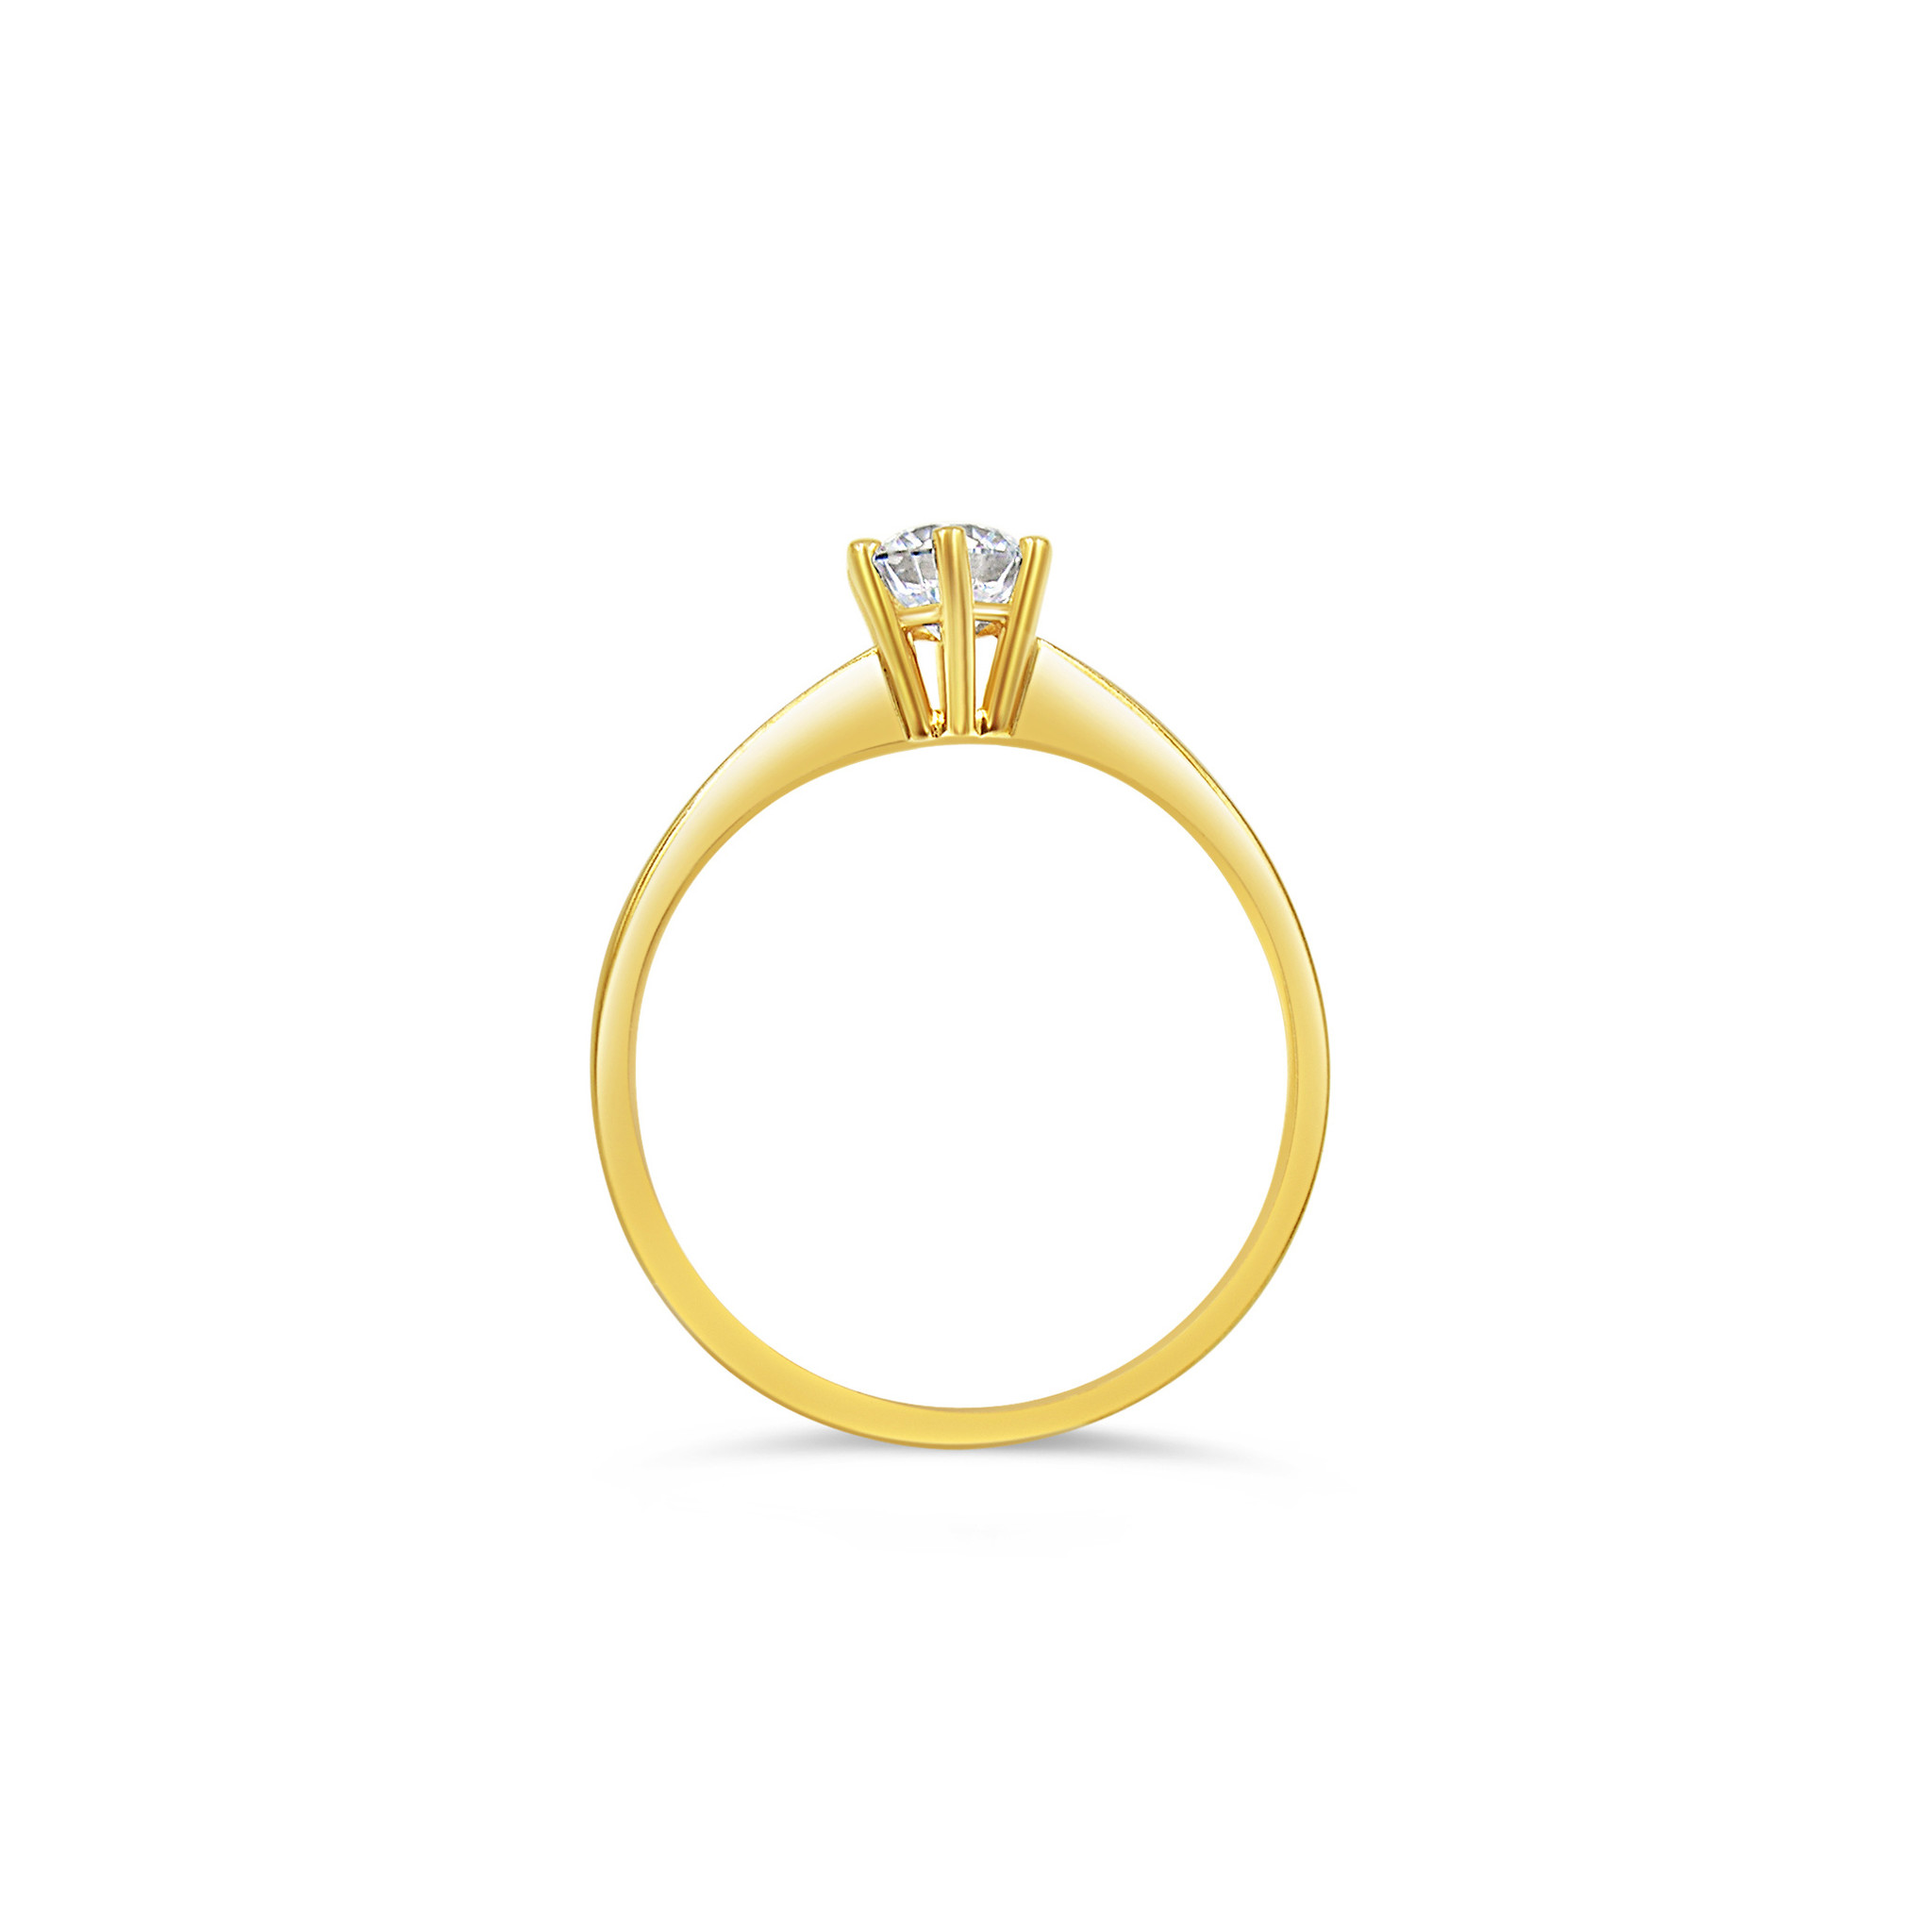 14kt yellow gold engagement ring with zirconia